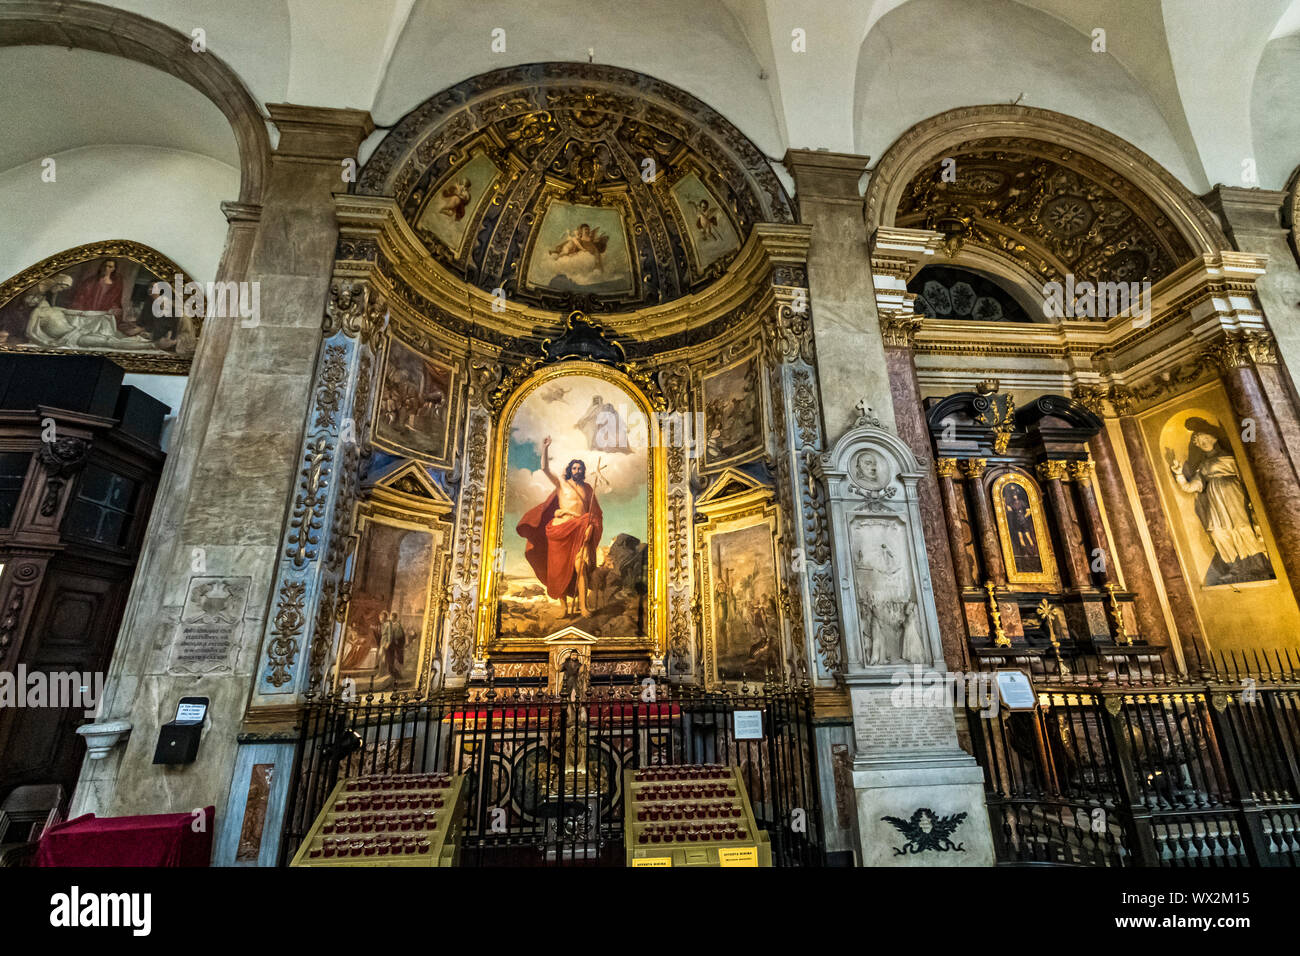 The interior of Duomo di Torino ,Turin Cathedral, a Roman Catholic cathedral in Turin dedicated to Saint John The Baptist ,Turin Italy Stock Photo